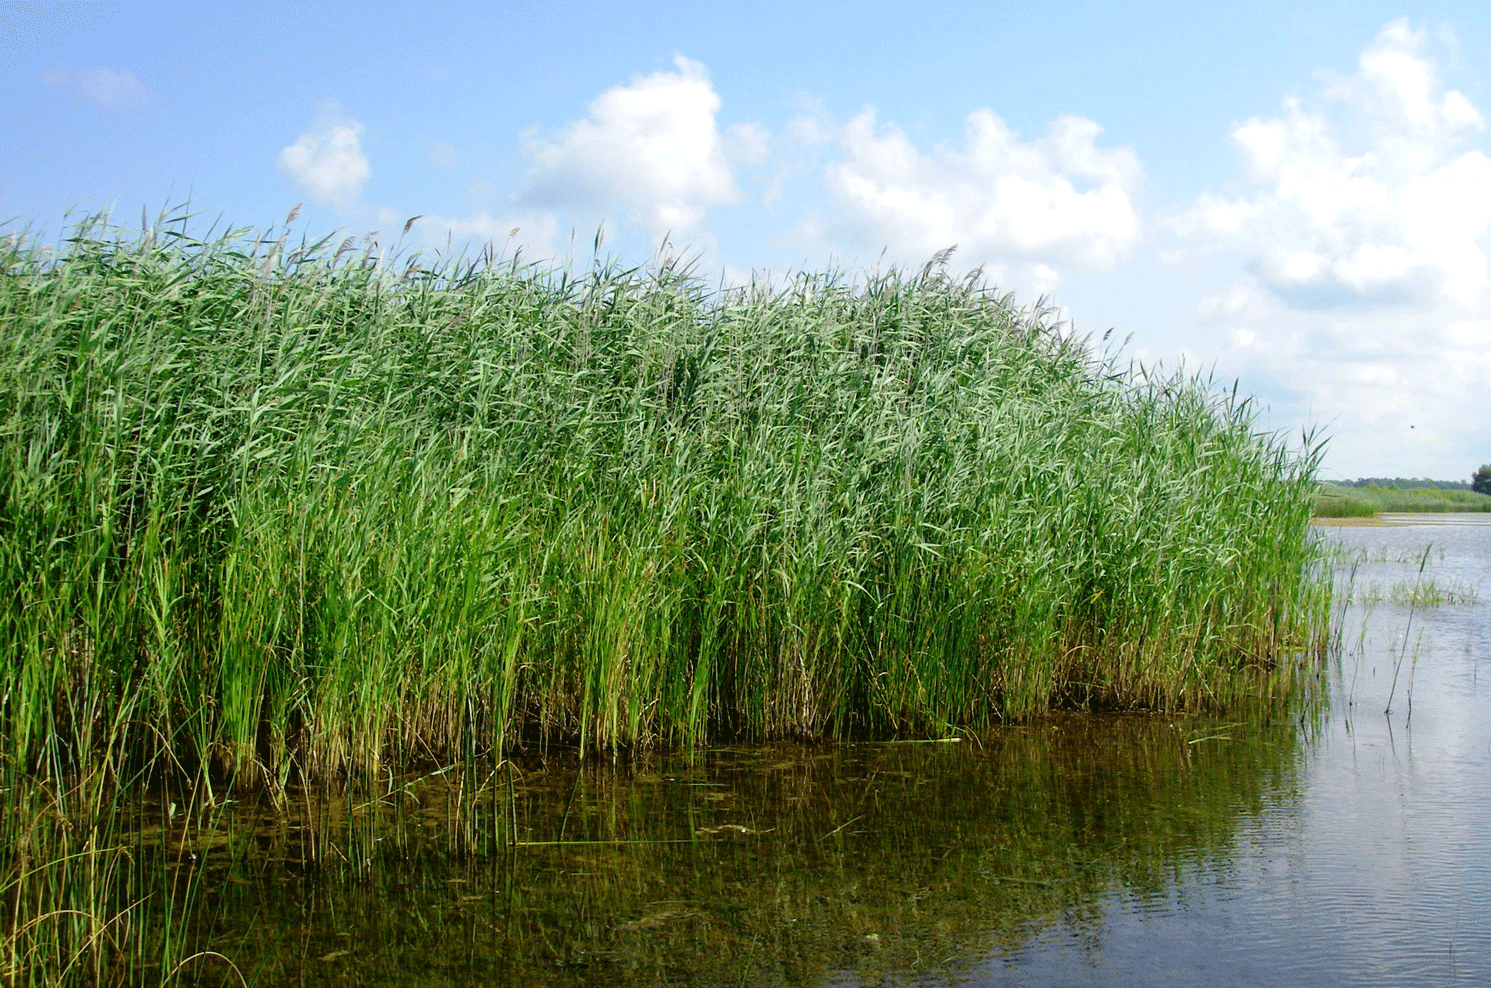 Invasive common reed is a wetland reed that can fill coastal areas with dense, tall
                        stands and cause problems for fish, people, and other plants. Photograph credit: Michigan
                        Department of Environment, Great Lakes, and Energy; used with permission.